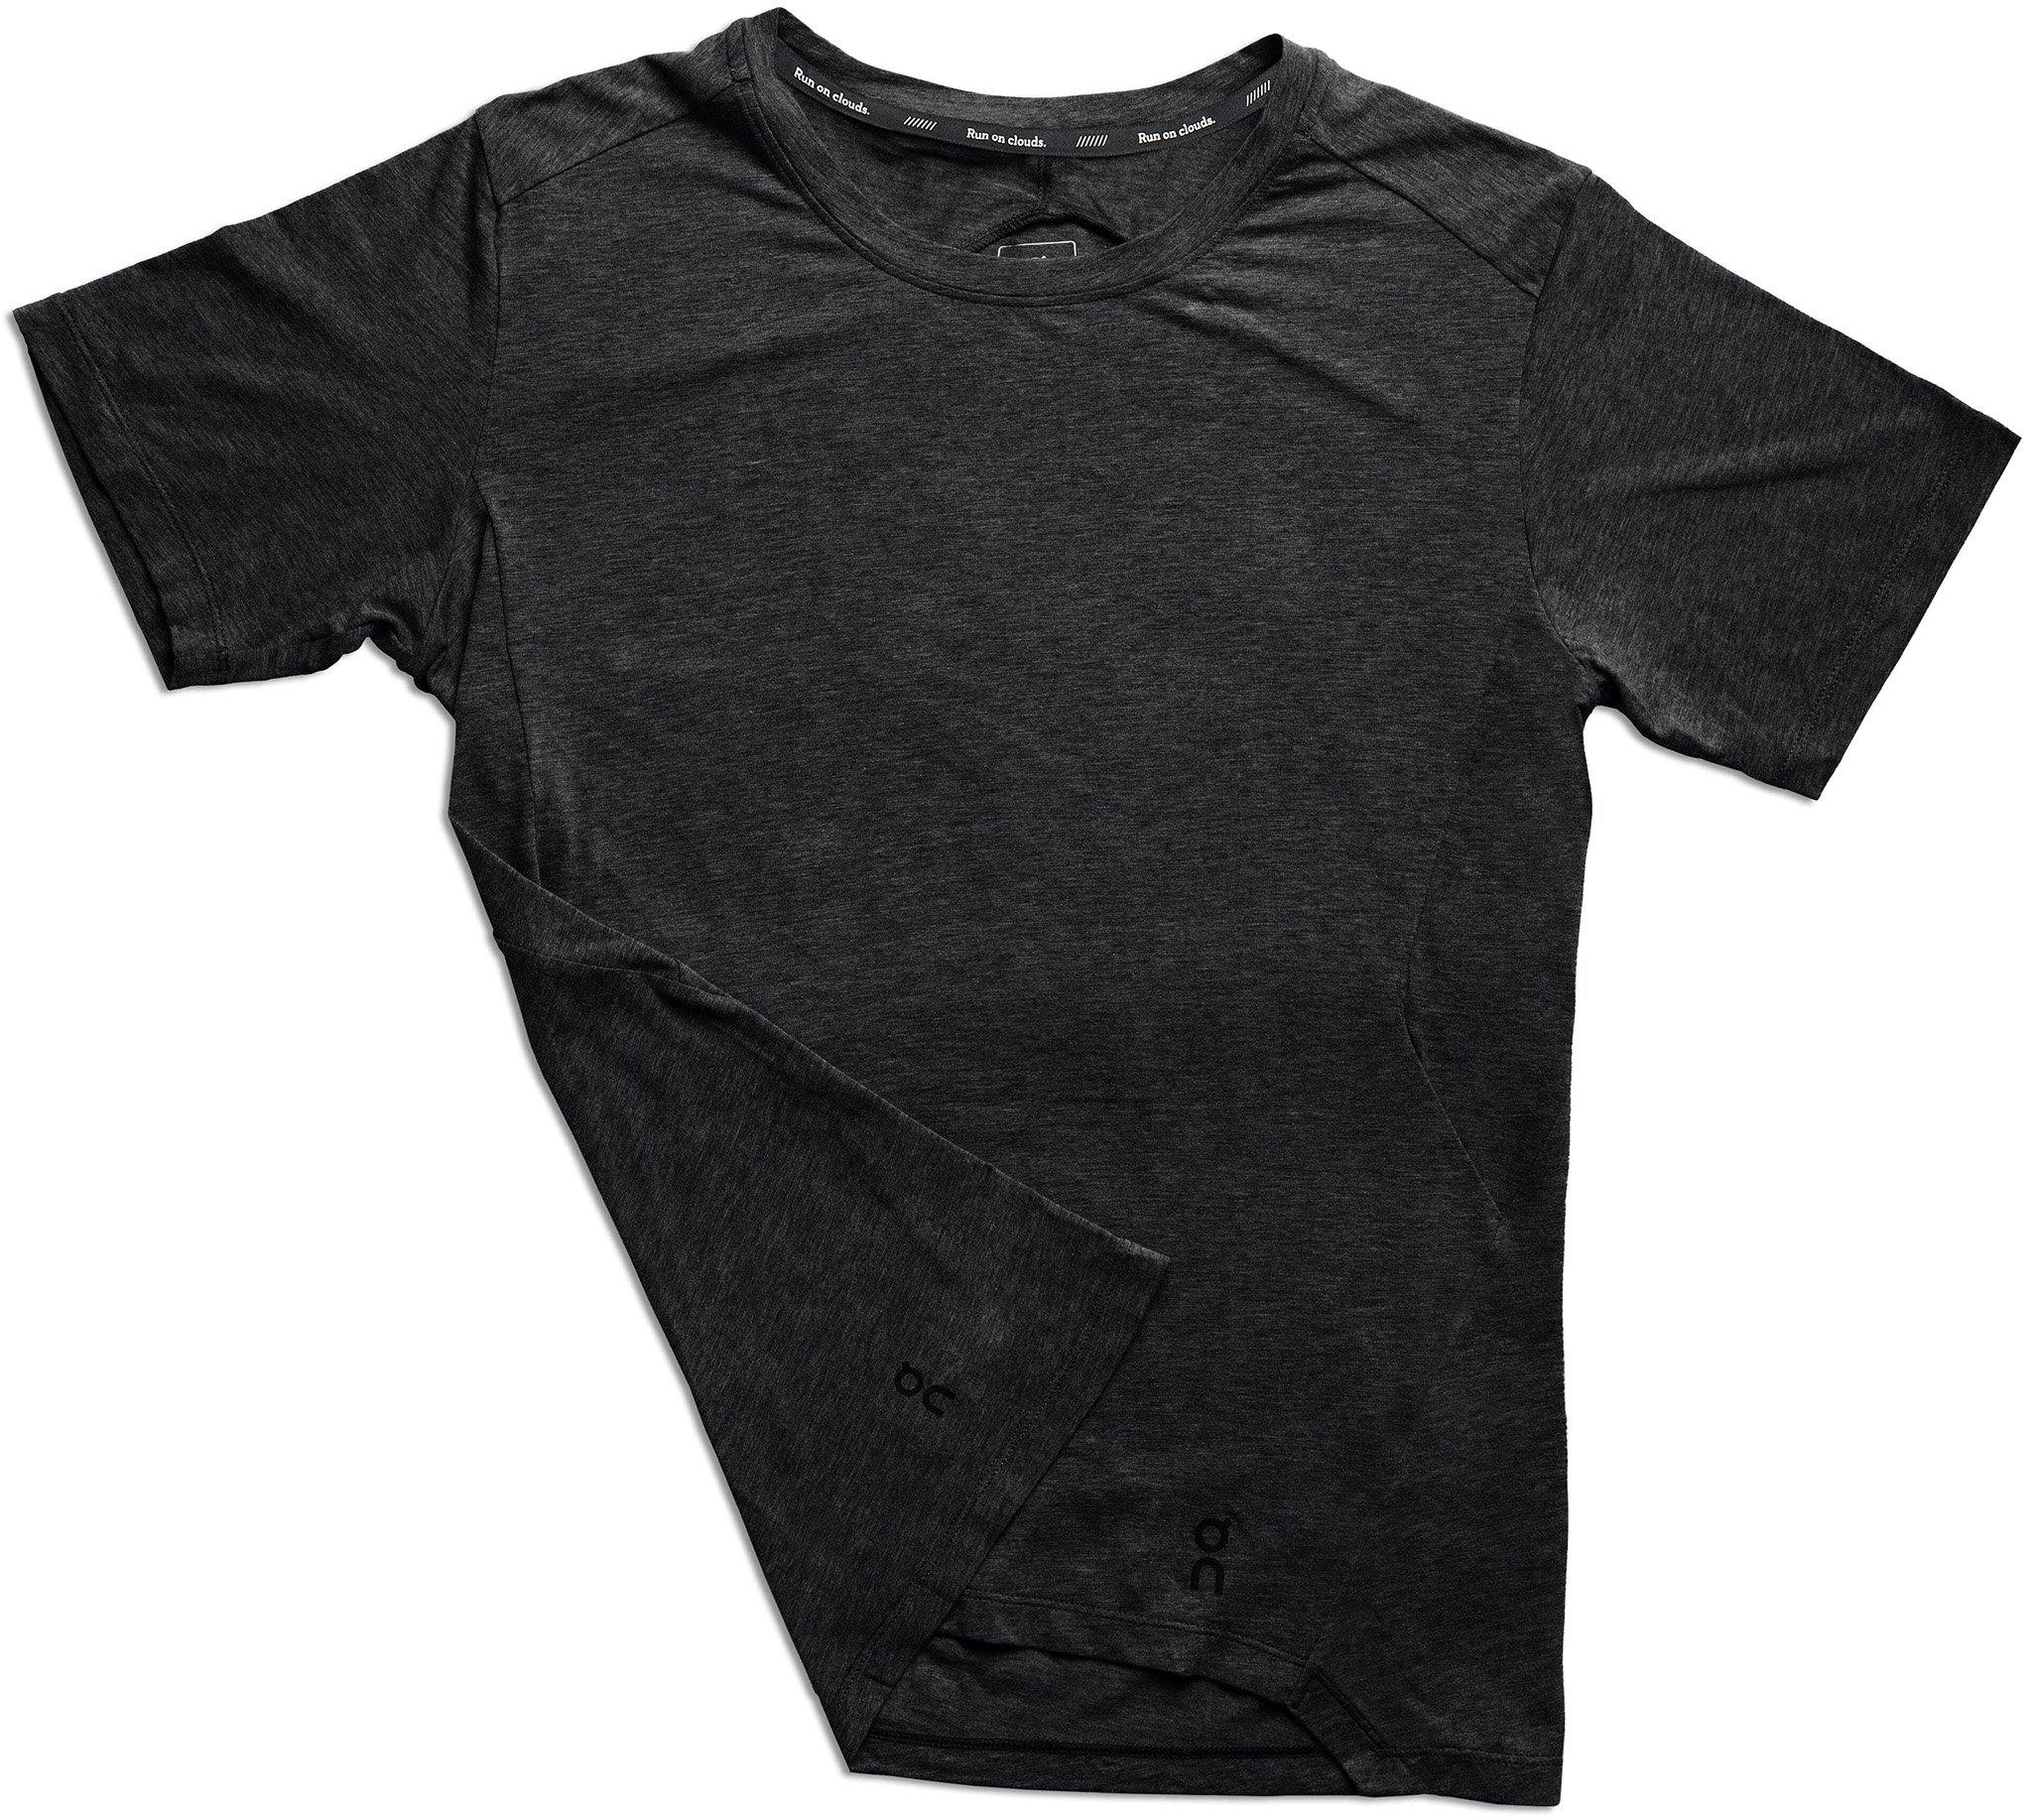 Product image for Active-T T-shirt - Men's